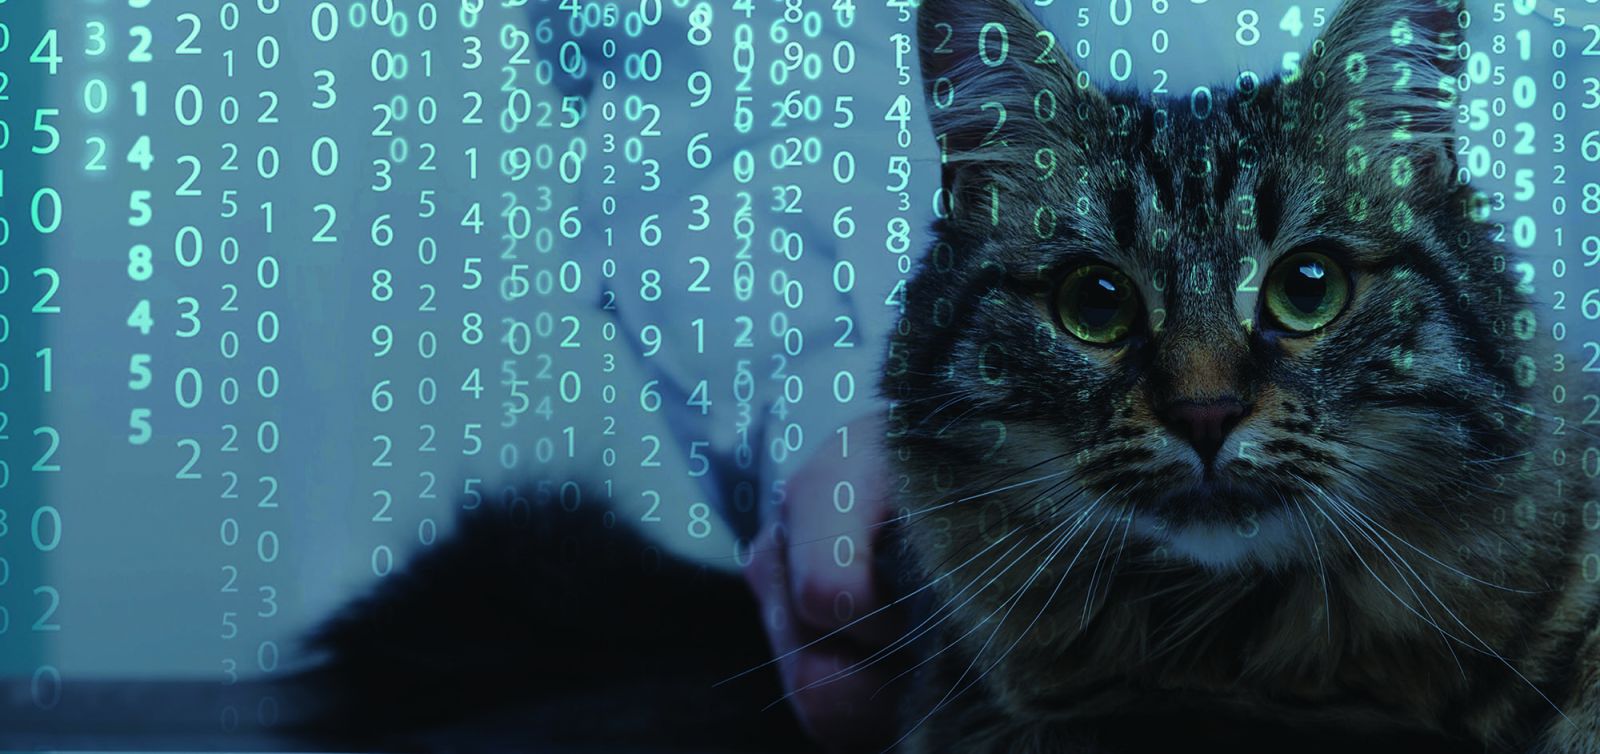 Photo of a cat with an overlay of data and numbers